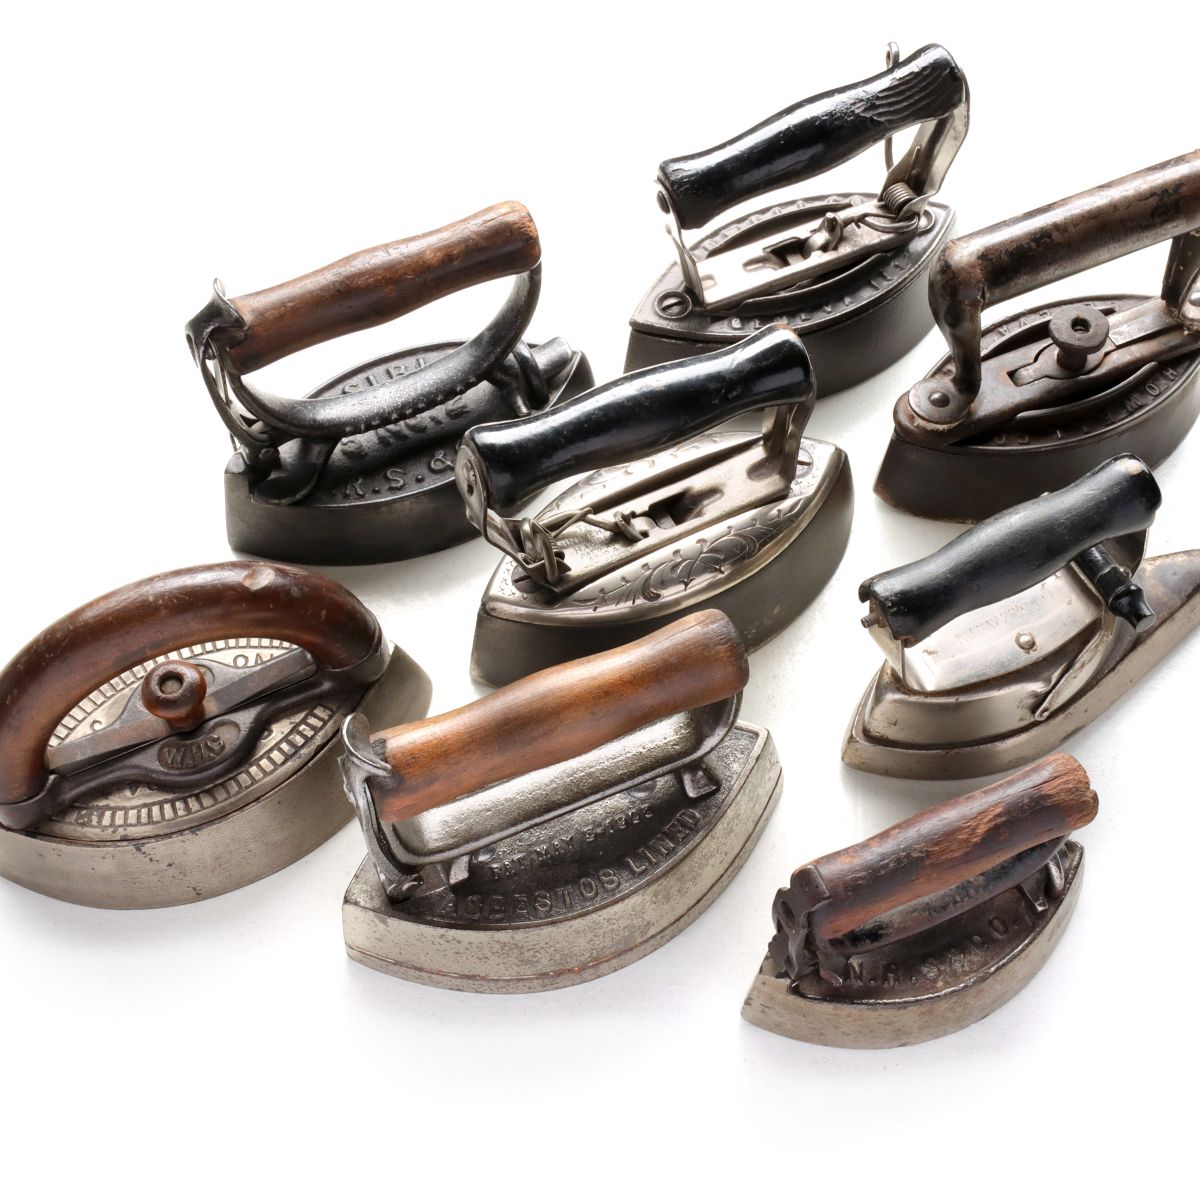 A COLLECTION OF ANTIQUE SAD IRONS